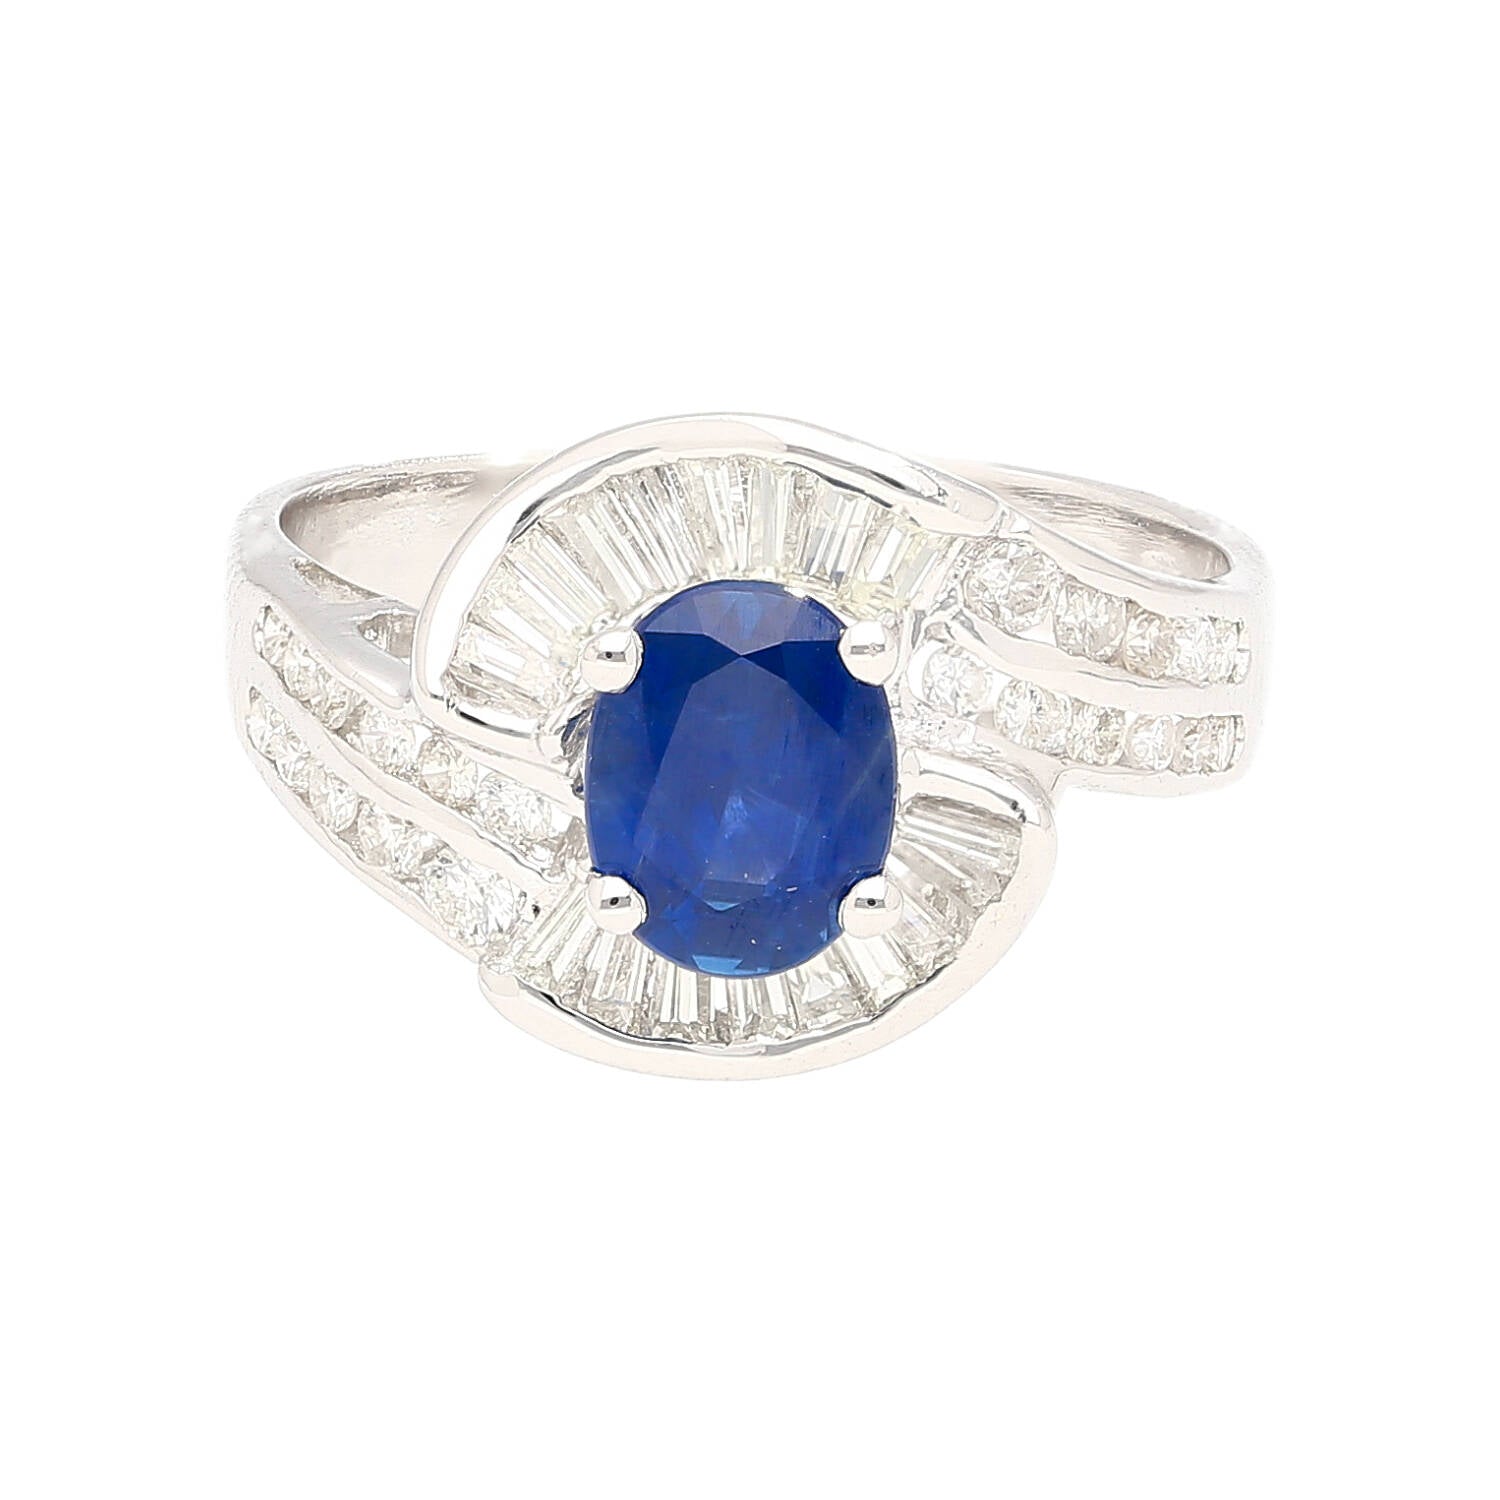 Natural-1_14-Carat-Oval-Cut-Blue-Sapphire-with-Round-Baguette-Cut-Diamonds-in-a-Swirled-18K-White-Gold-Ring-Setting-Rings-2.jpg